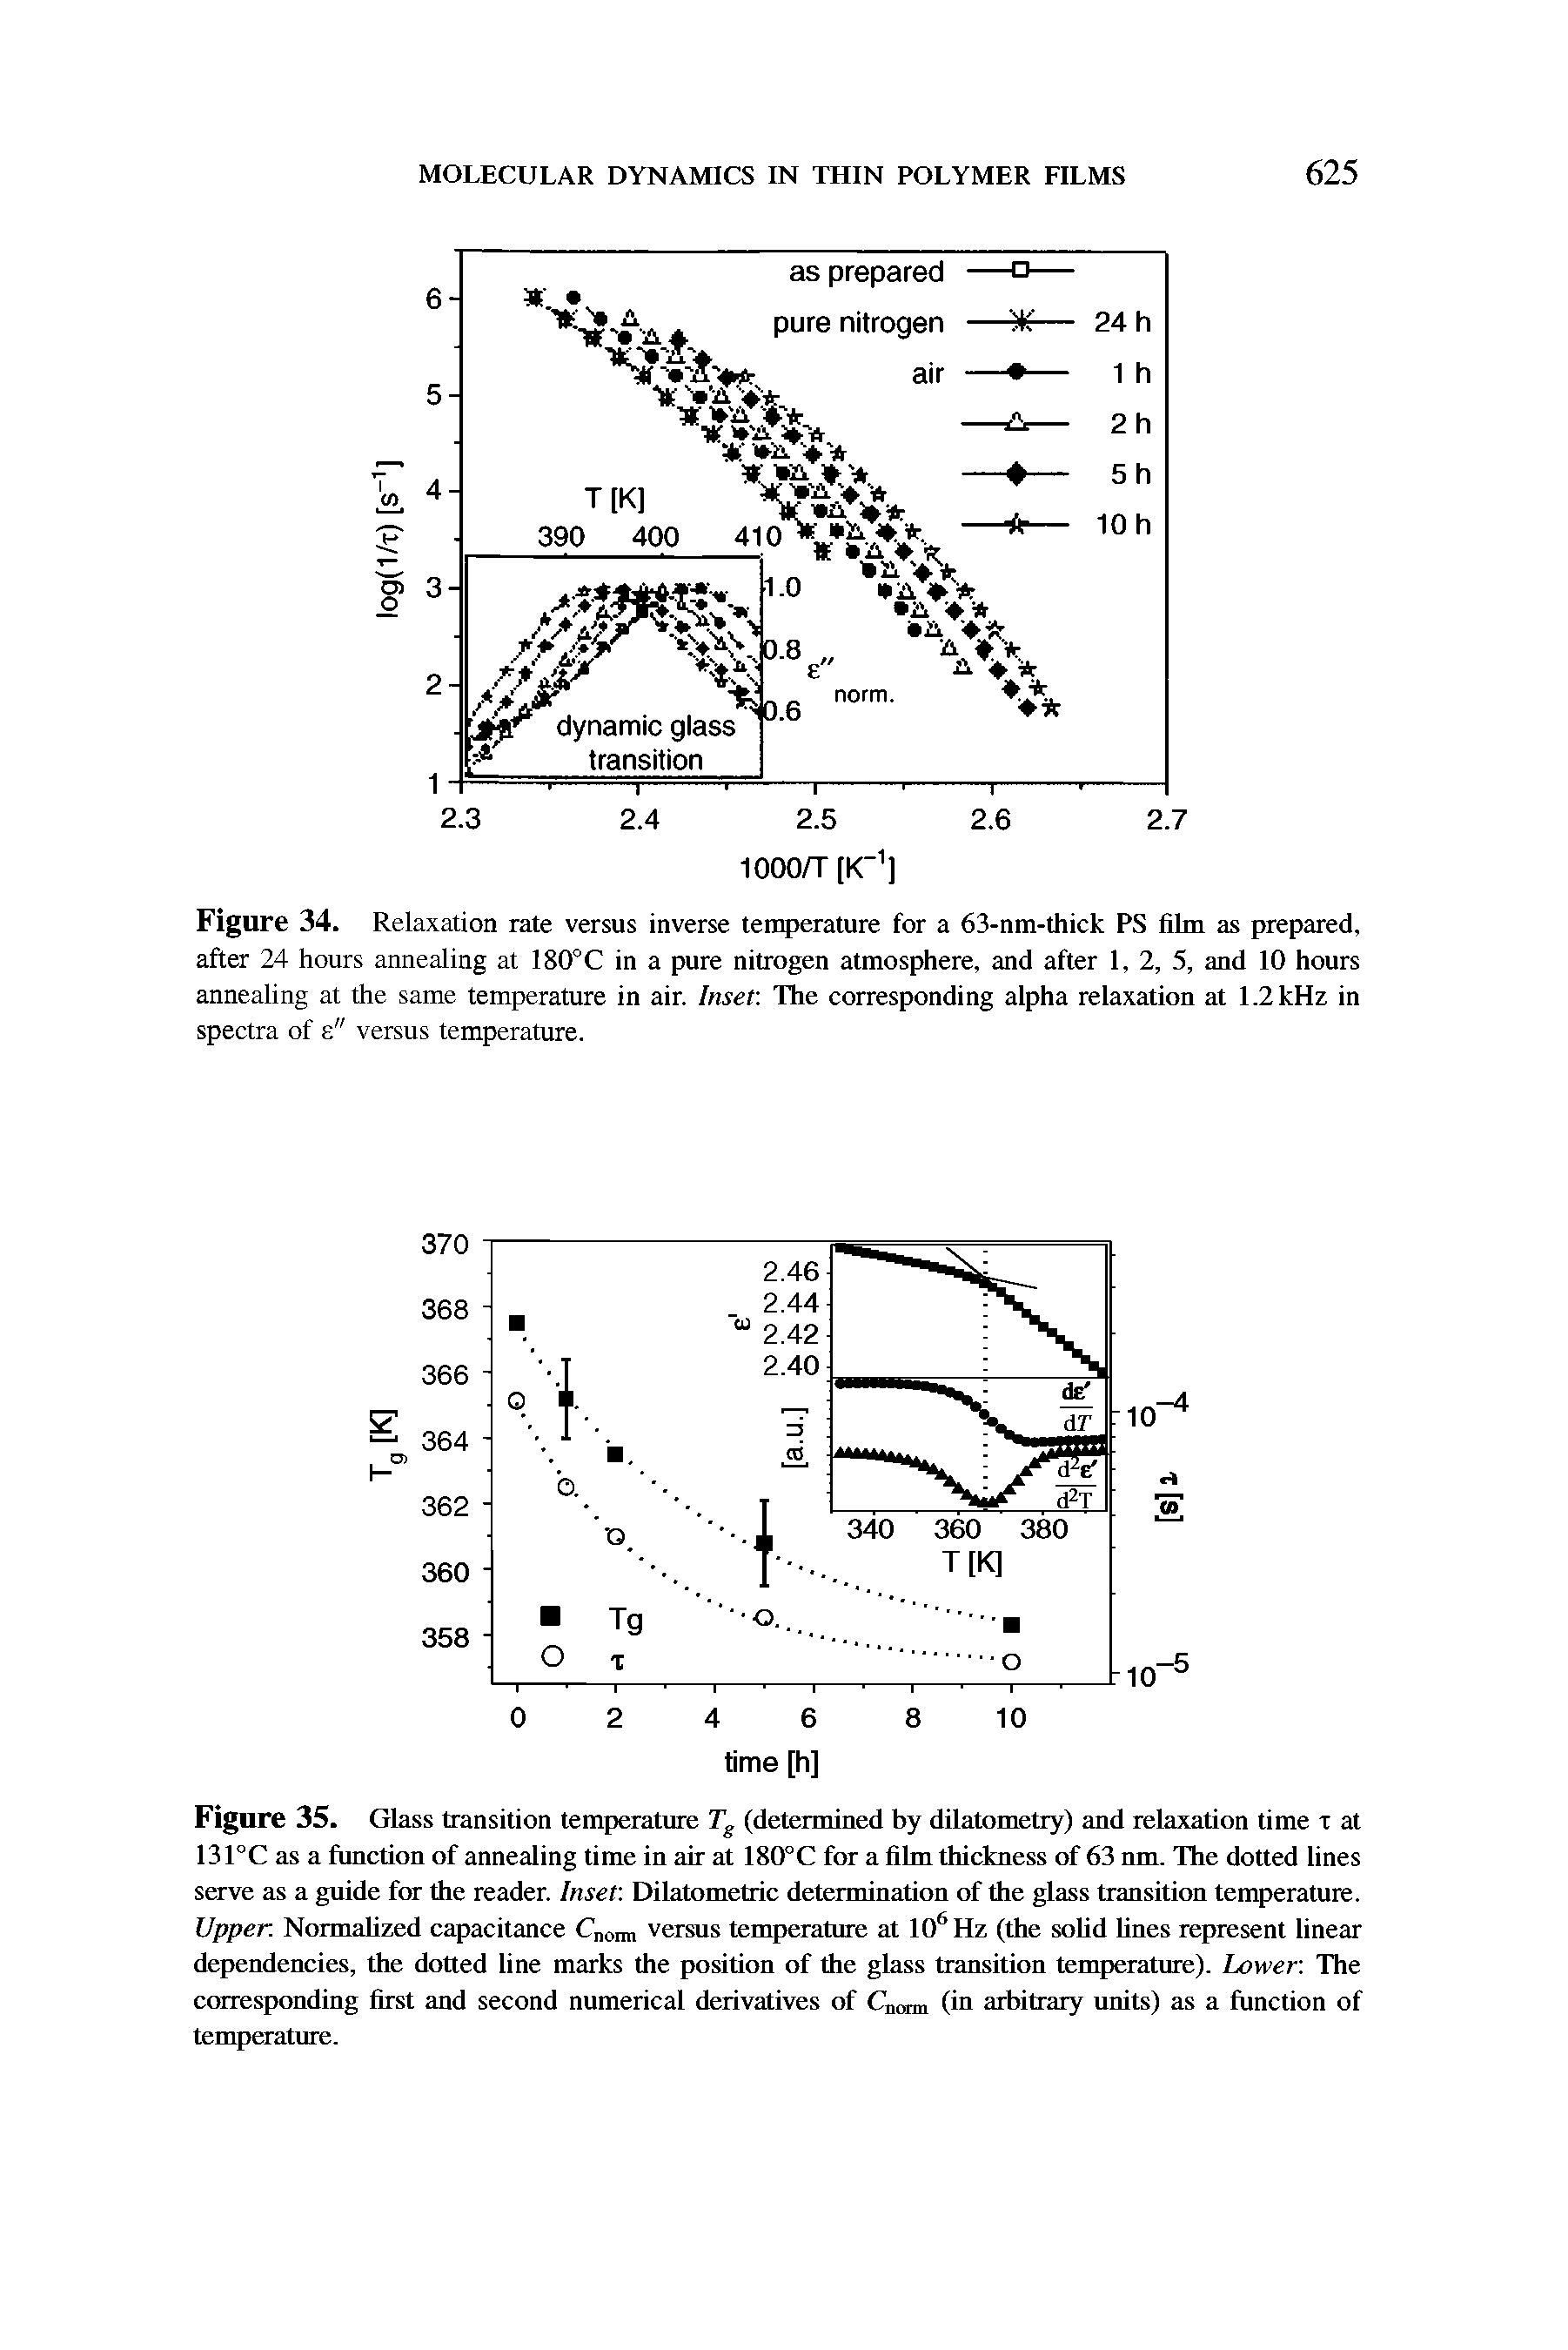 Figure 34. Relaxation rate versus inverse temperature for a 63-nm-thick PS film as prepared, after 24 hours annealing at 180°C in a pure nitrogen atmosphere, and after 1, 2, 5, and 10 hours annealing at the same temperature in air. Inset The corresponding alpha relaxation at 1.2 kHz in spectra of s" versus temperature.